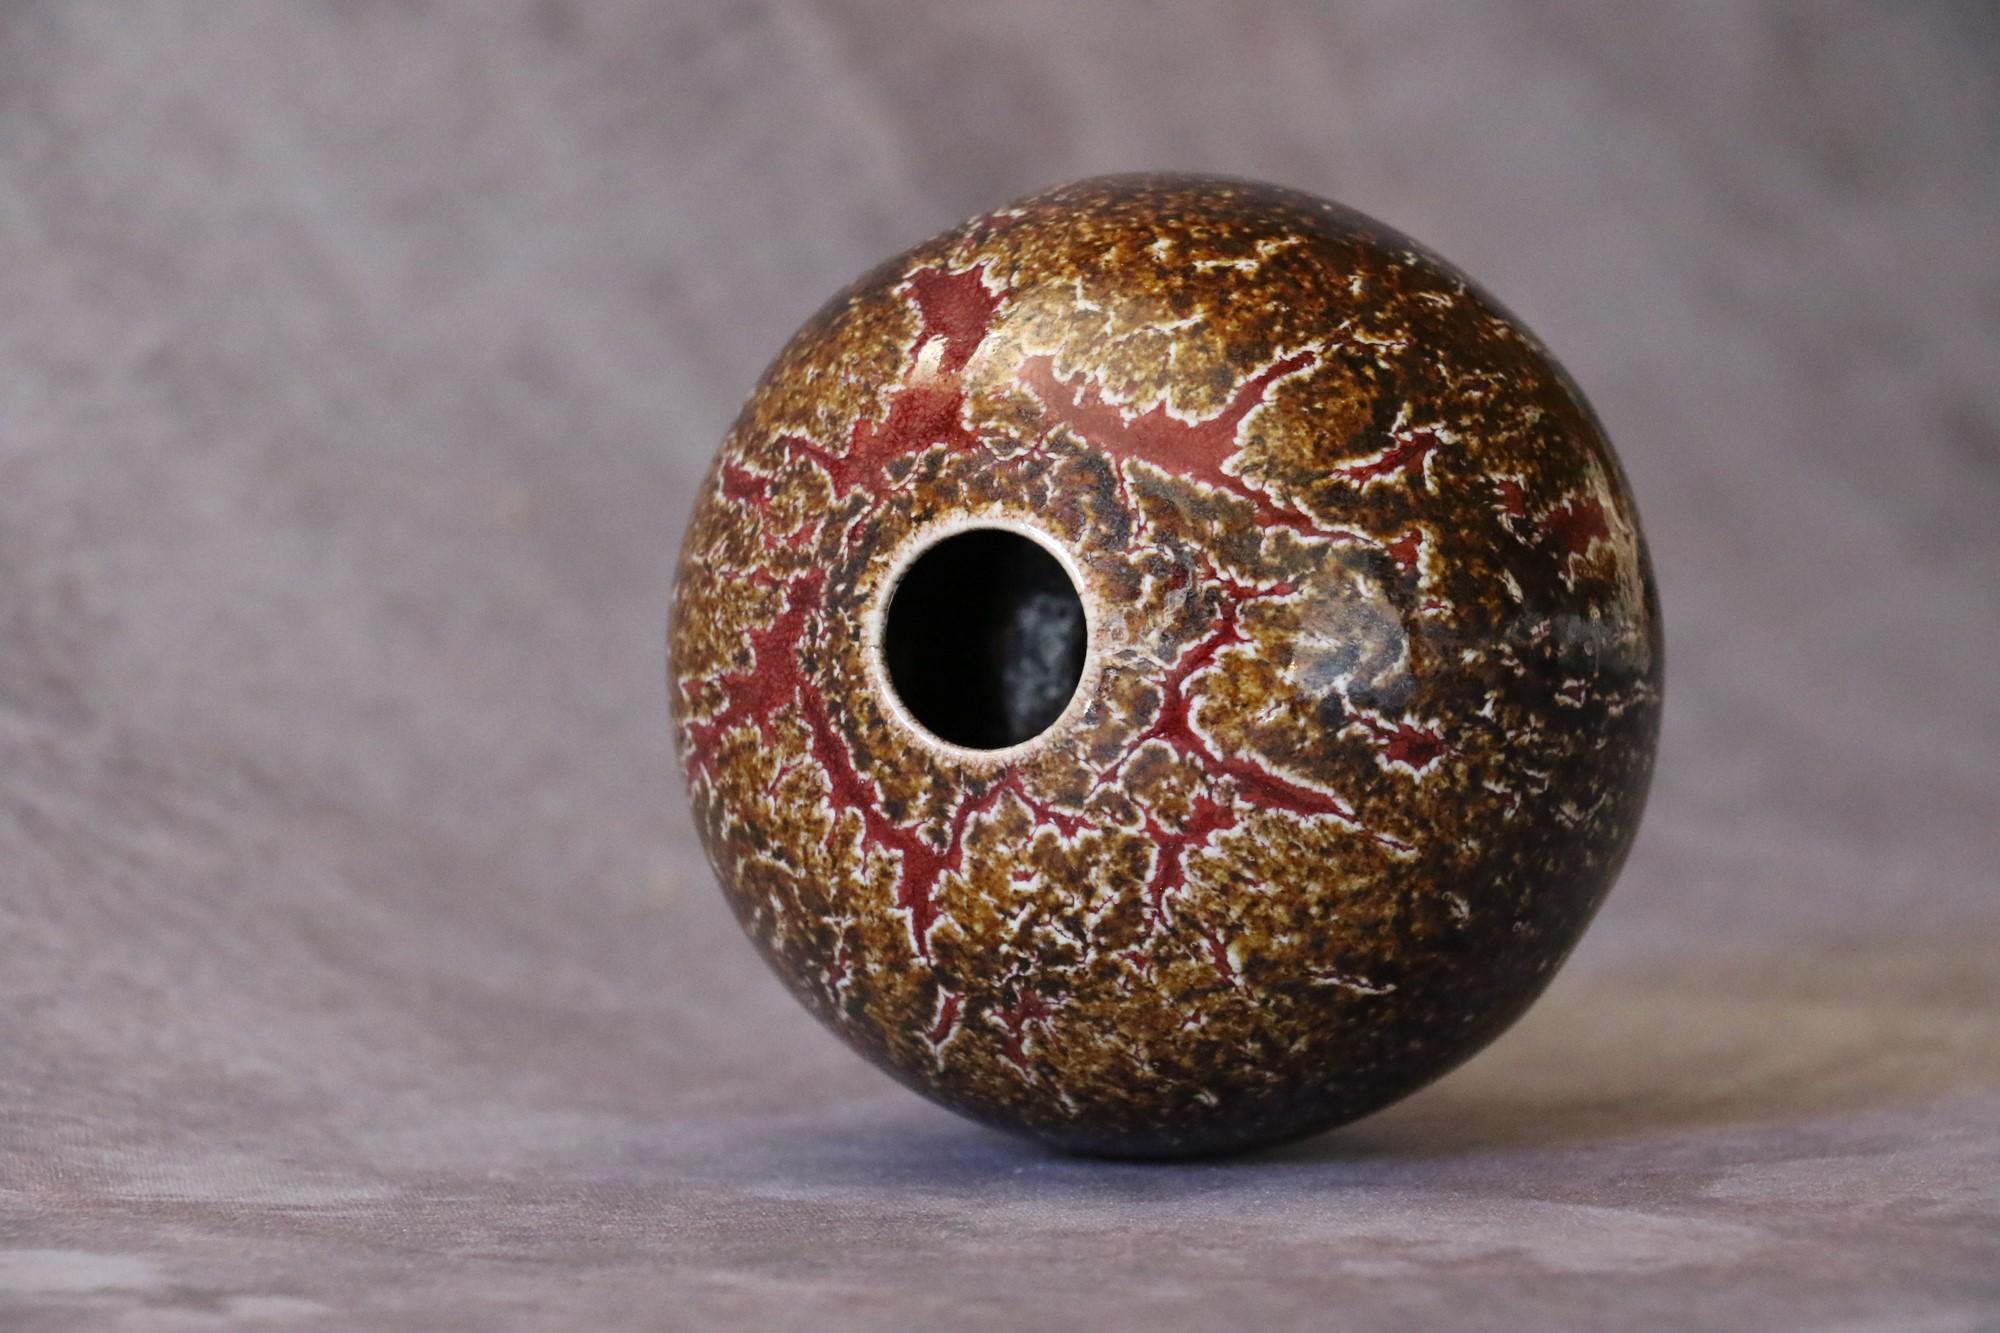 French ceramic ball vase by Marc Uzan - circa 2000
Delicate enamelling in red and brown tones - Ring neck
Signed under the base
Very good condition

--------------------------
Born in Sousse, Tunisia in 1955, Marc Uzan discovered modelling at